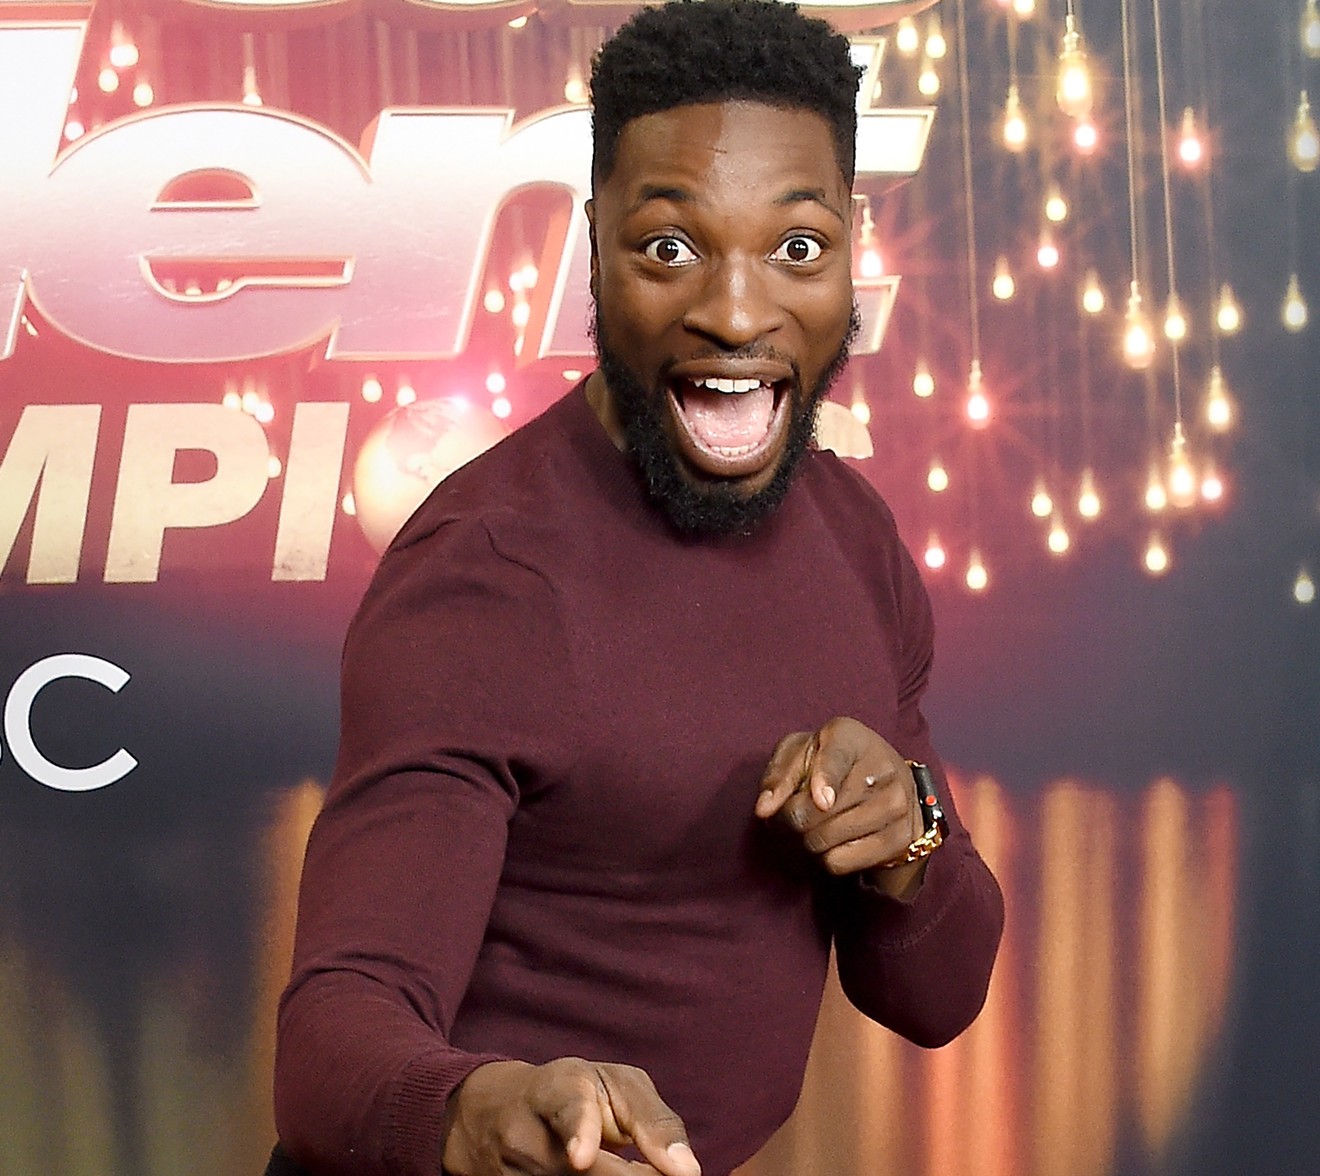 Preacher Lawson keeps forgetting how successful he's become.